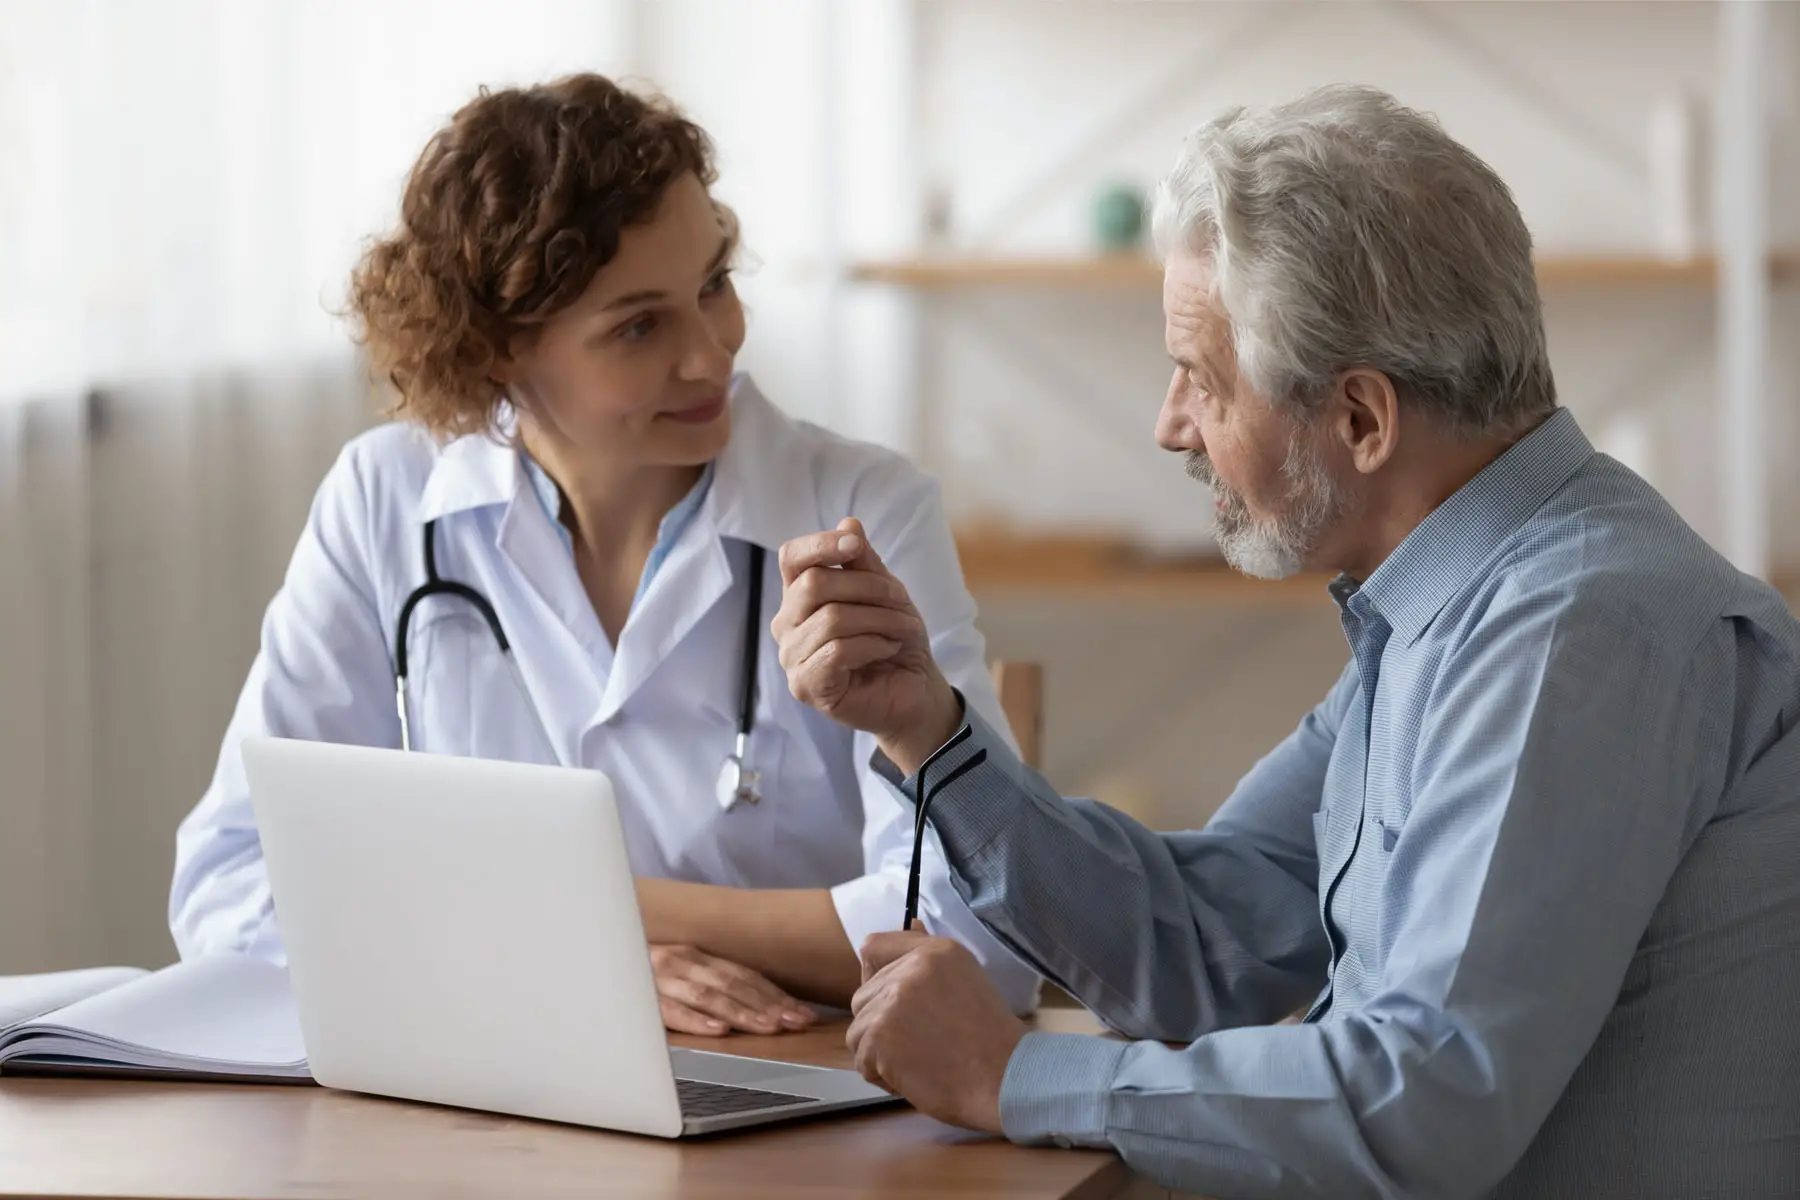 doctors Luxembourg: patient consults physician